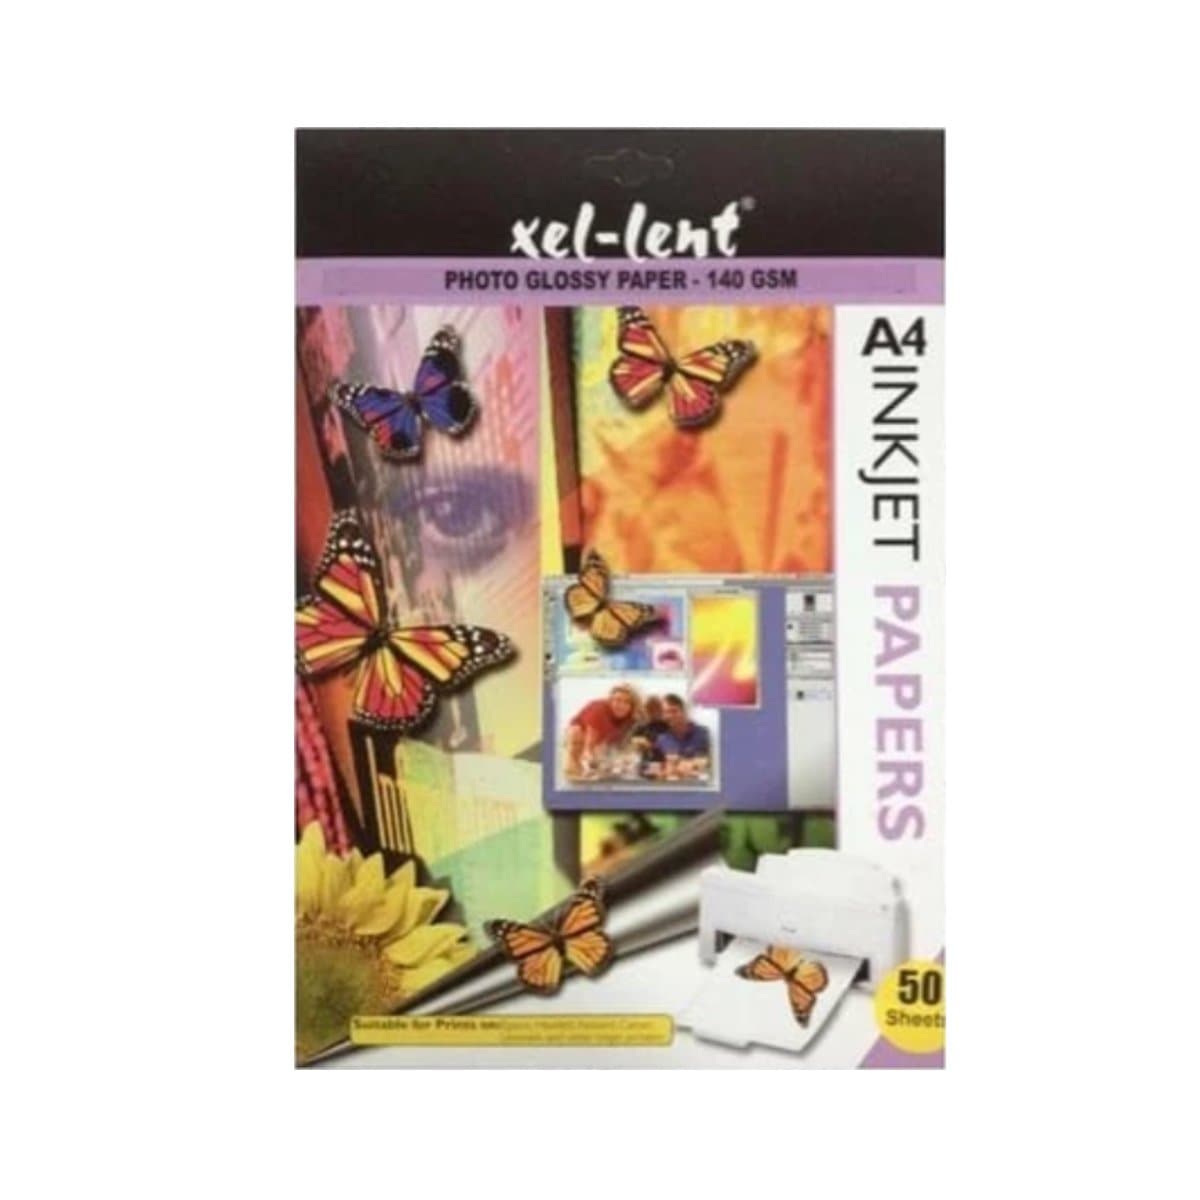 xel-lent Inkjet Glossy Photo Paper, A4, 140 gsm, 50 sheets, White